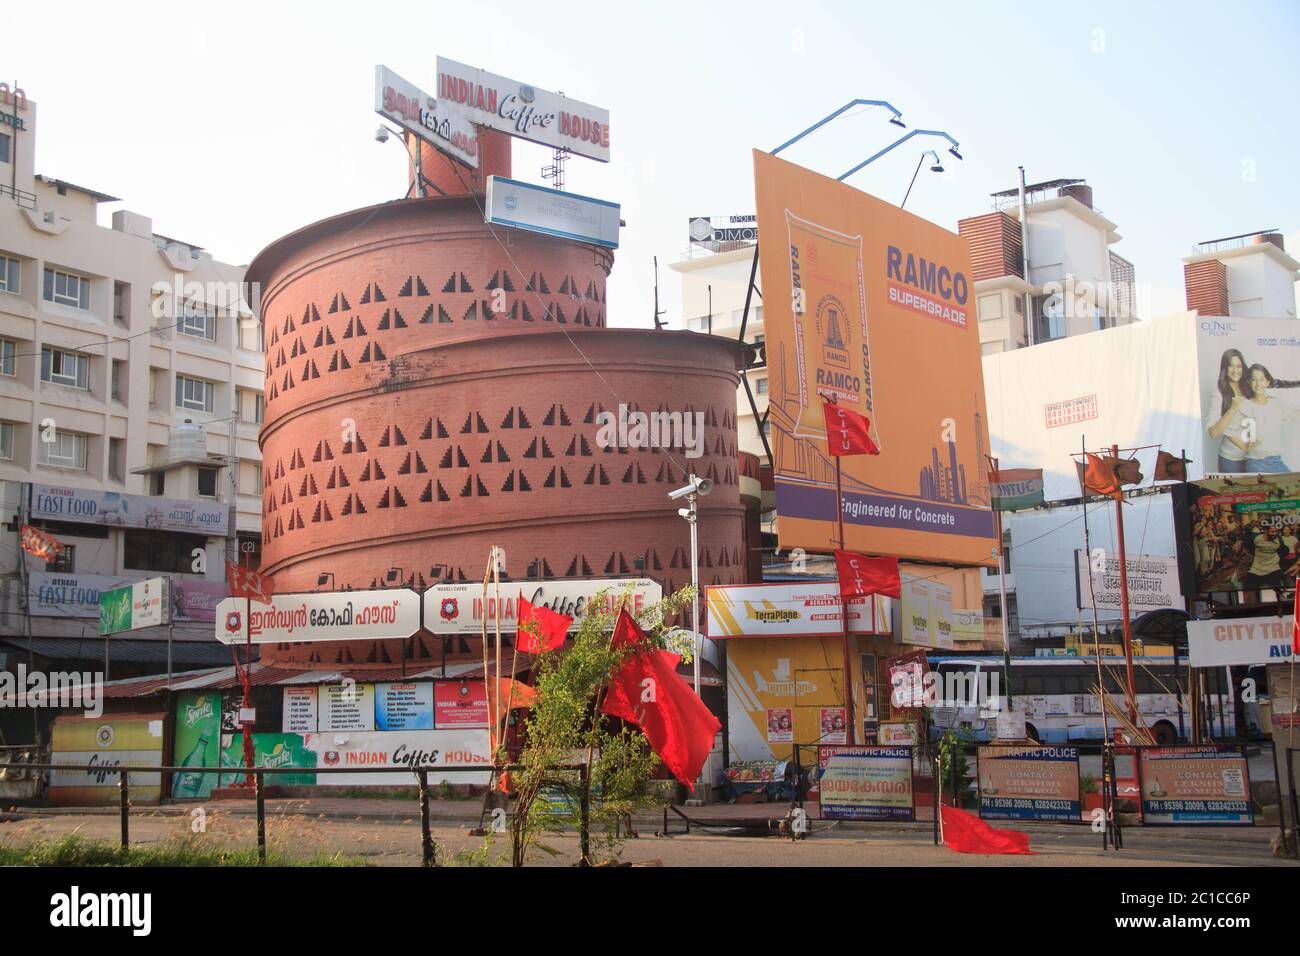 One of the prominent landmarks in the Thampanoor area of Trivandrum, Larie Baker's Indian Coffee House, Thambanoor Stock Photo